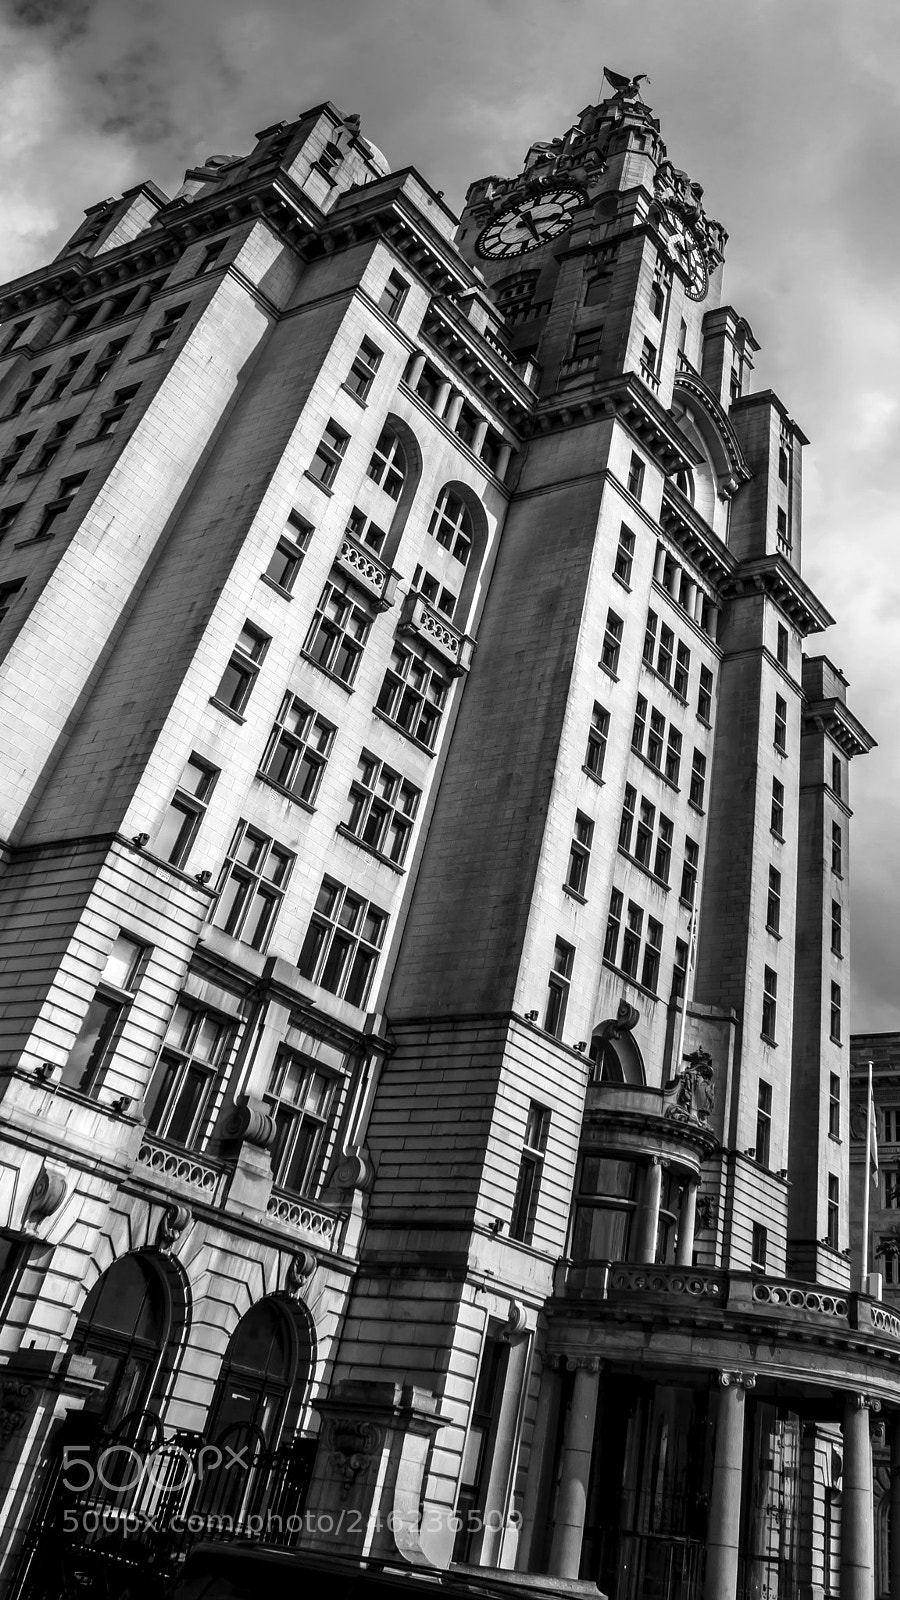 Sony a7 sample photo. Liver building photography